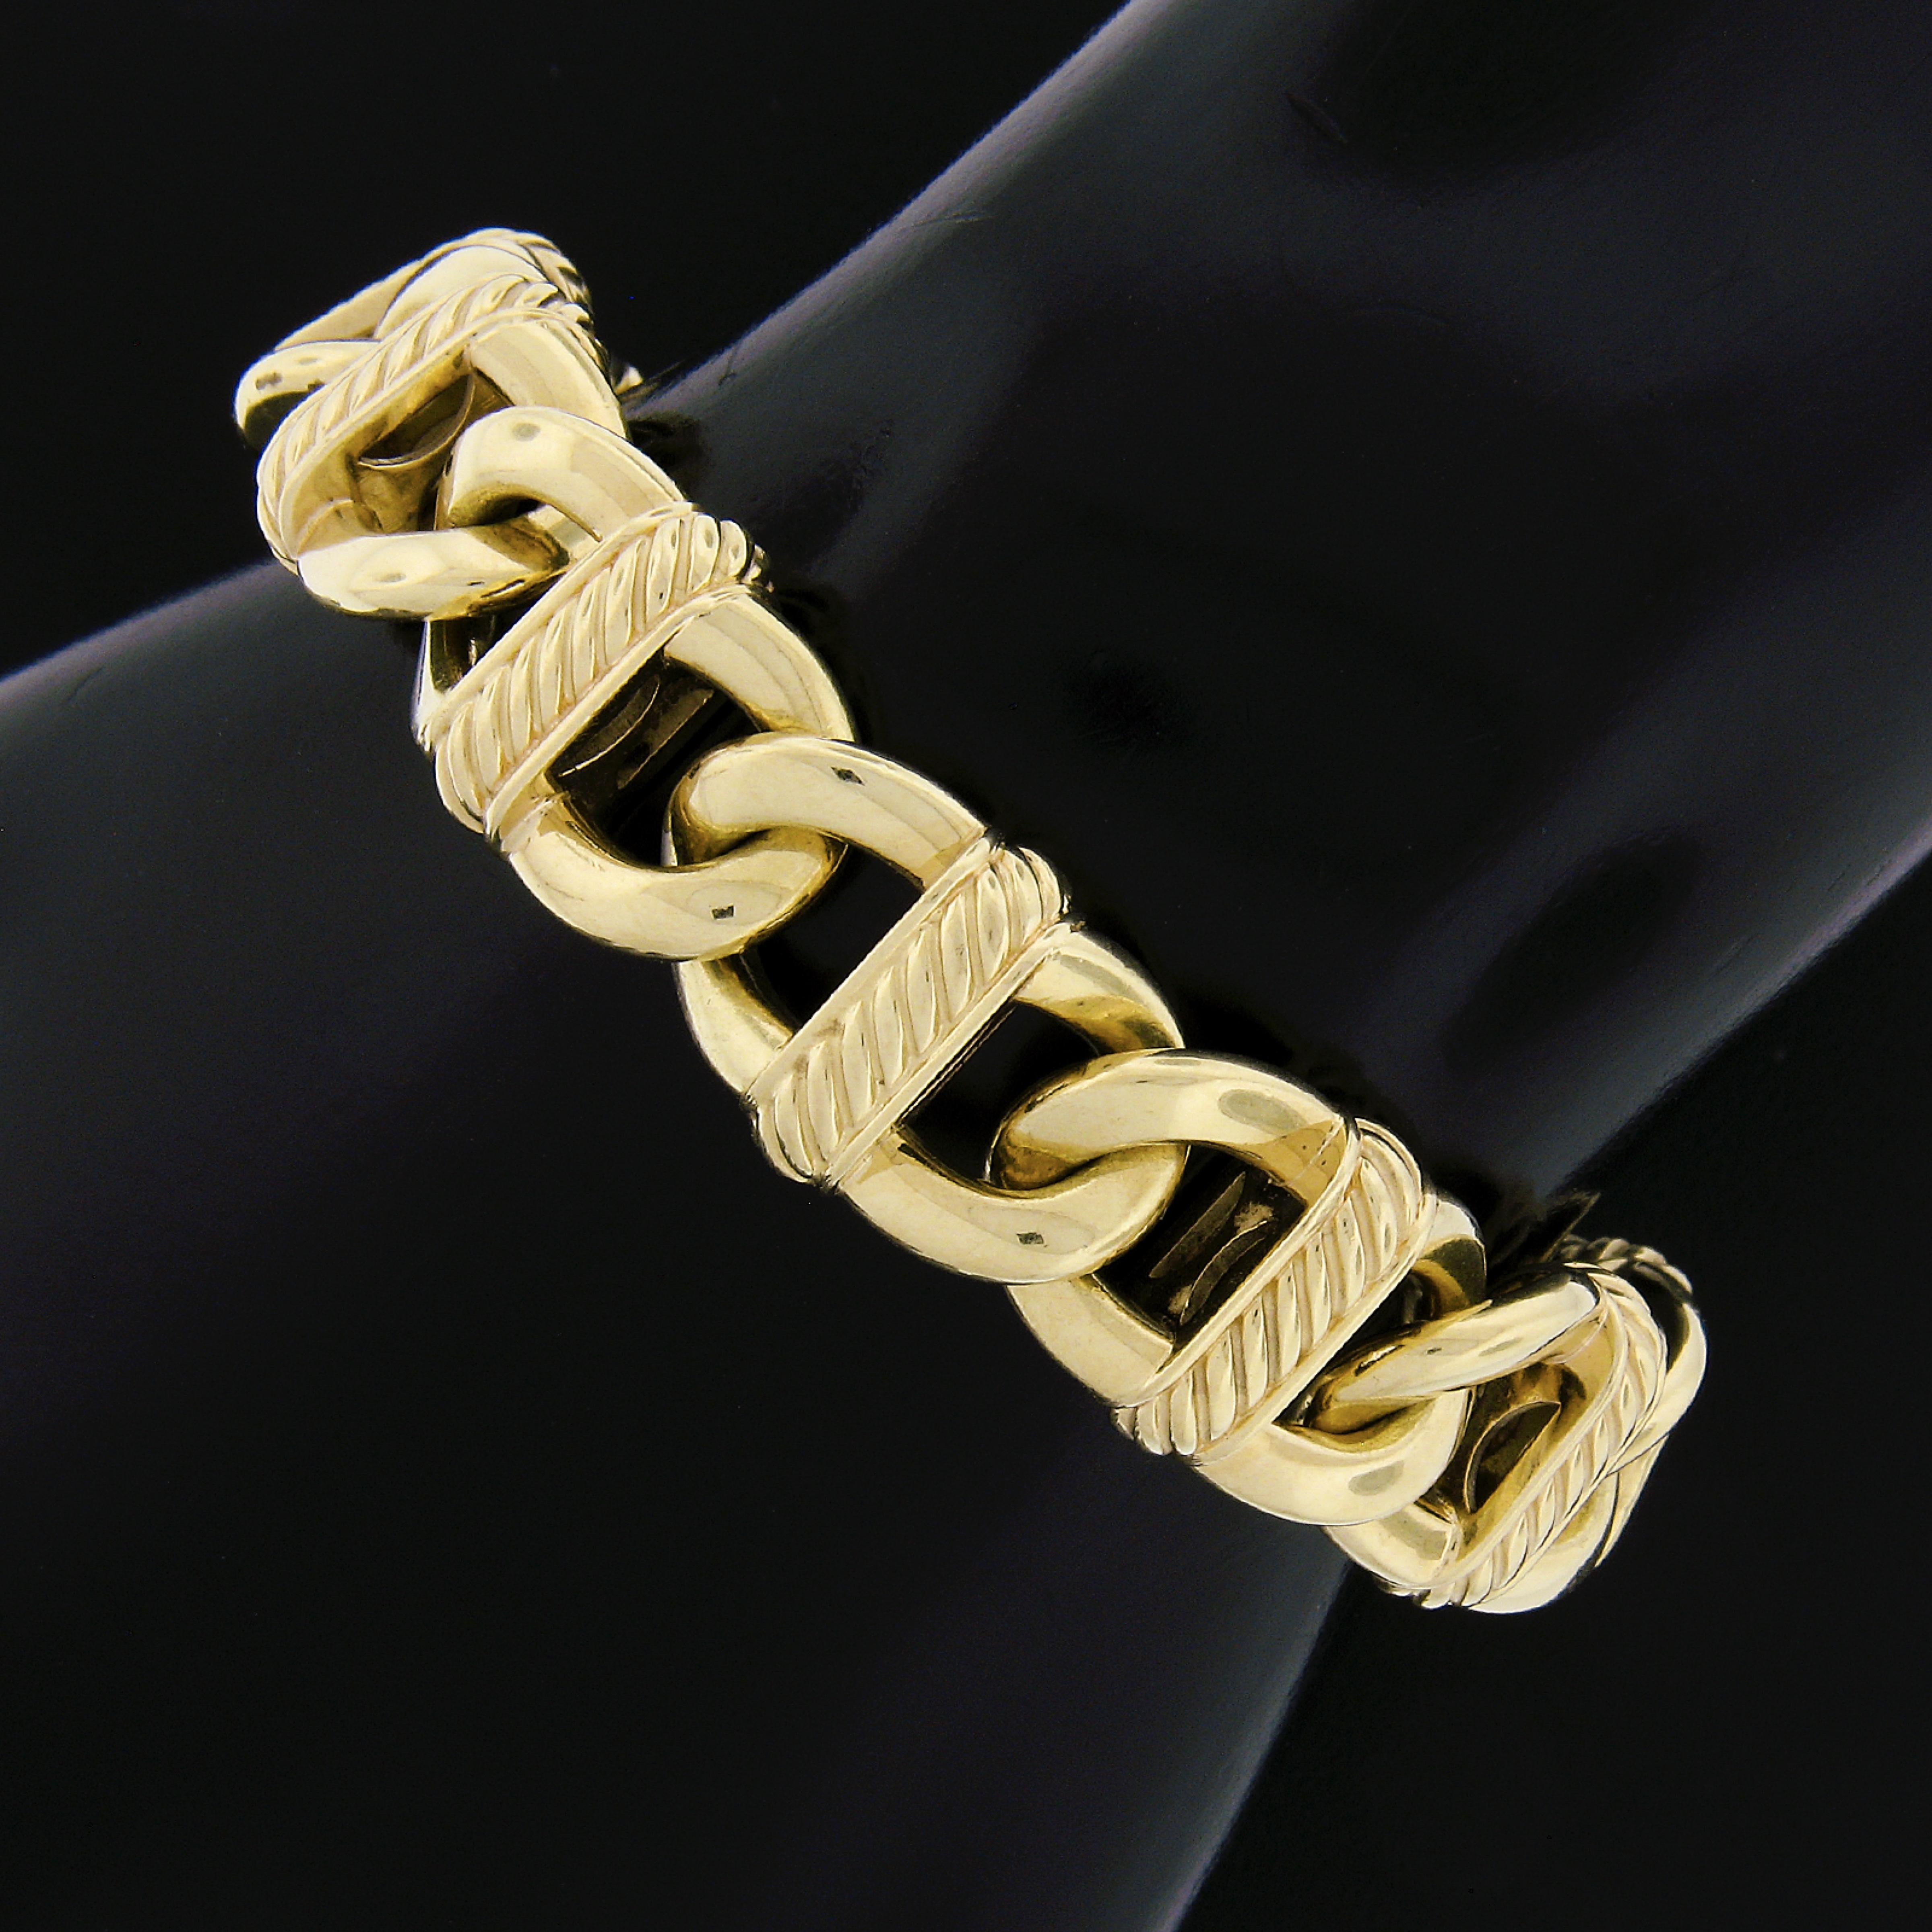 David Yurman 18k Gold Open Cable Link Chain Bracelet W/ Twisted Wire In Good Condition For Sale In Montclair, NJ